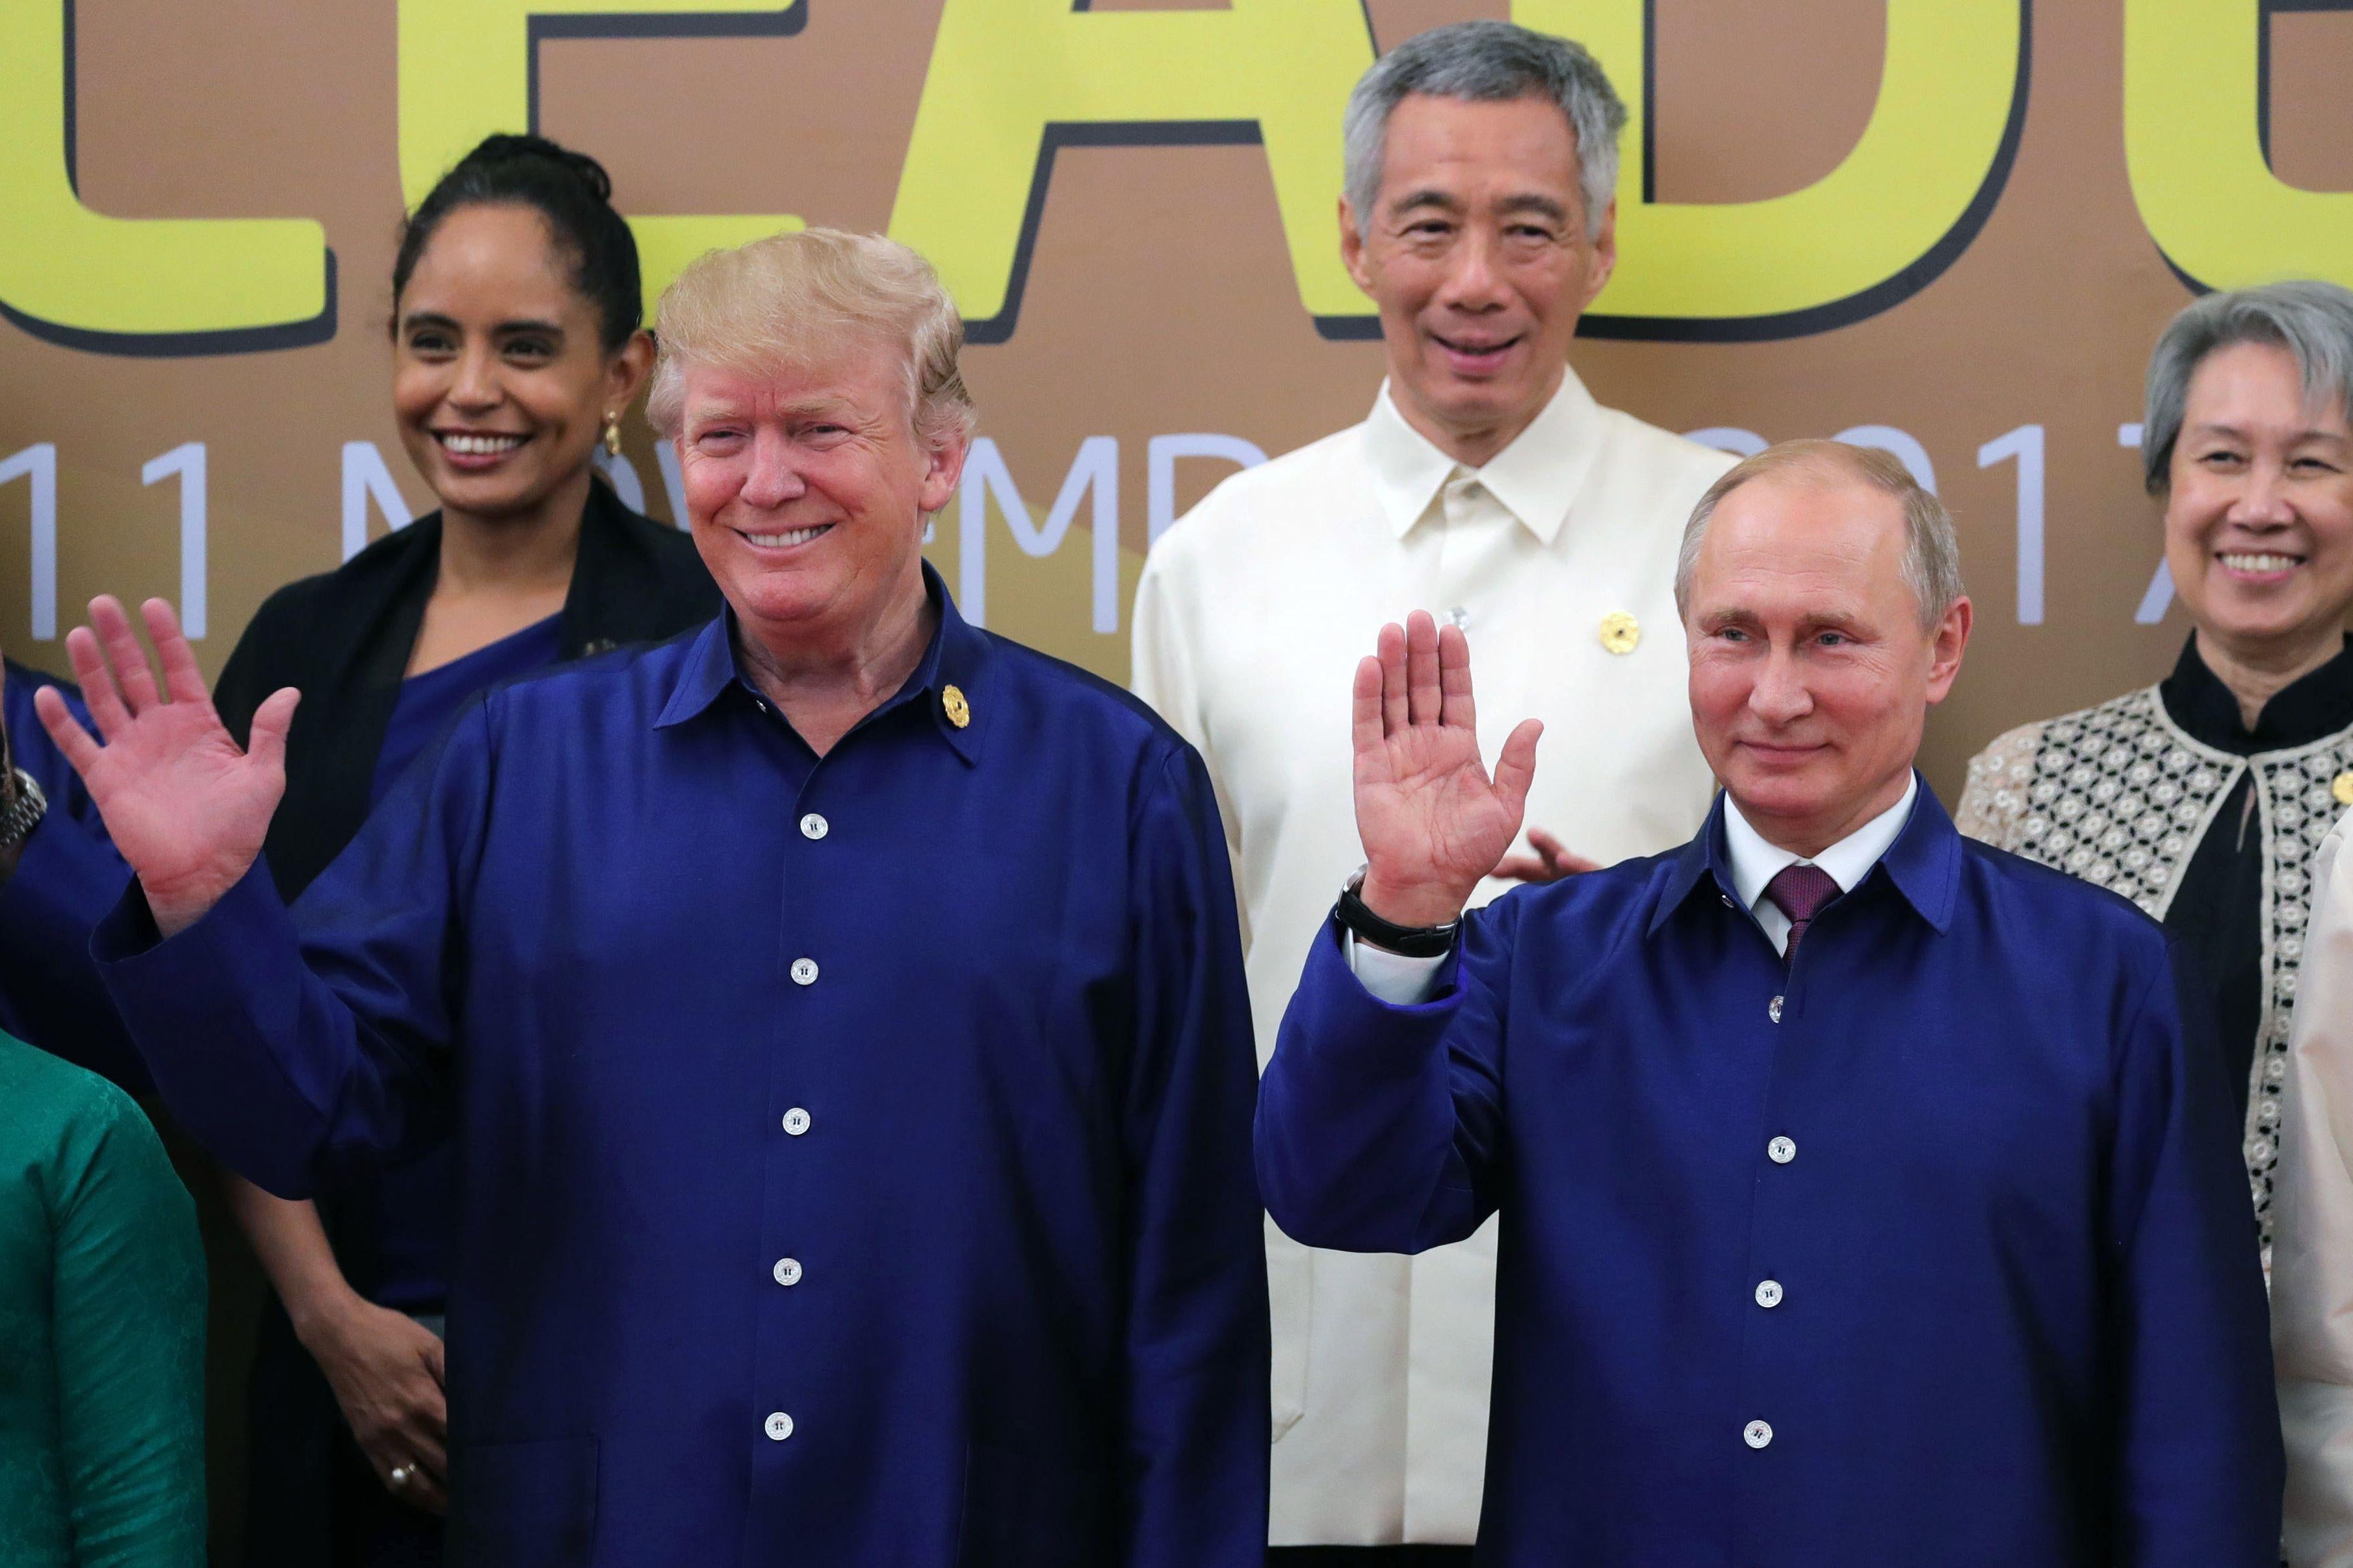 U.S. President Donald Trump and Russian President Vladimir Putin wave during a group photo of APEC leaders